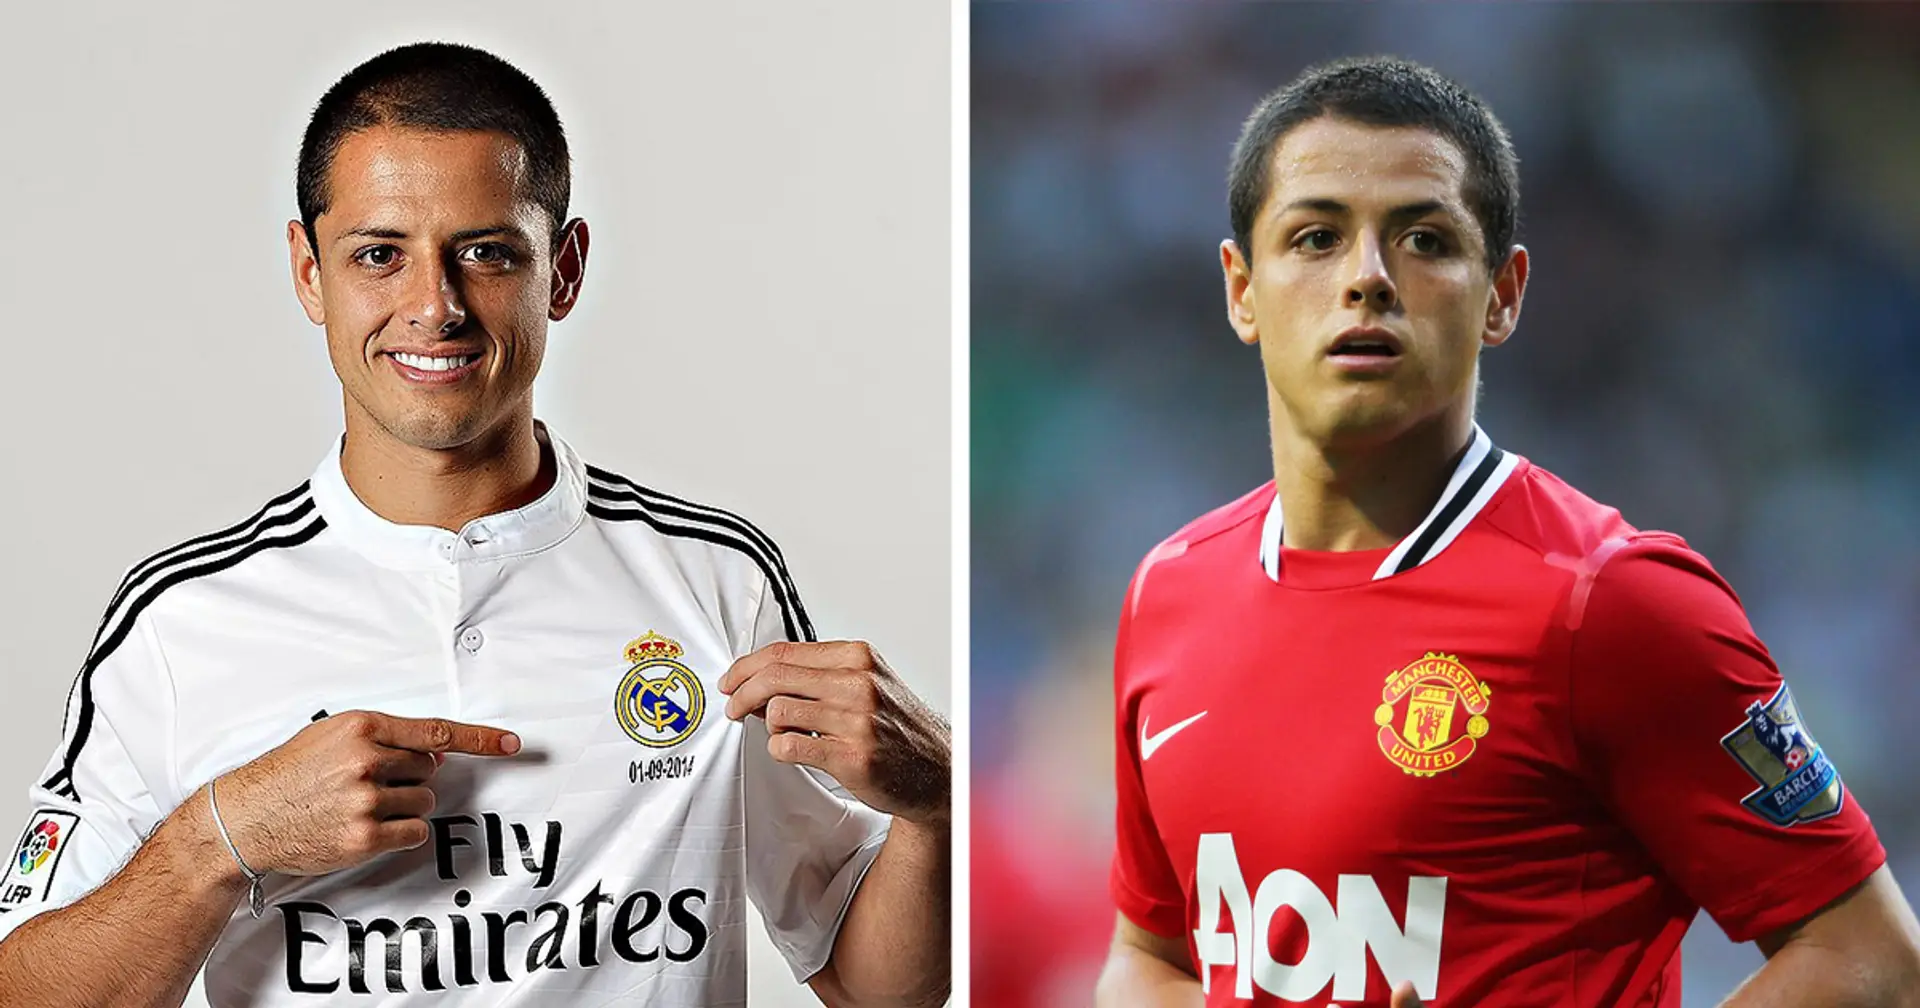 Ex-Madridista Chicharito singles out one key difference between playing for Los Blancos and Man United